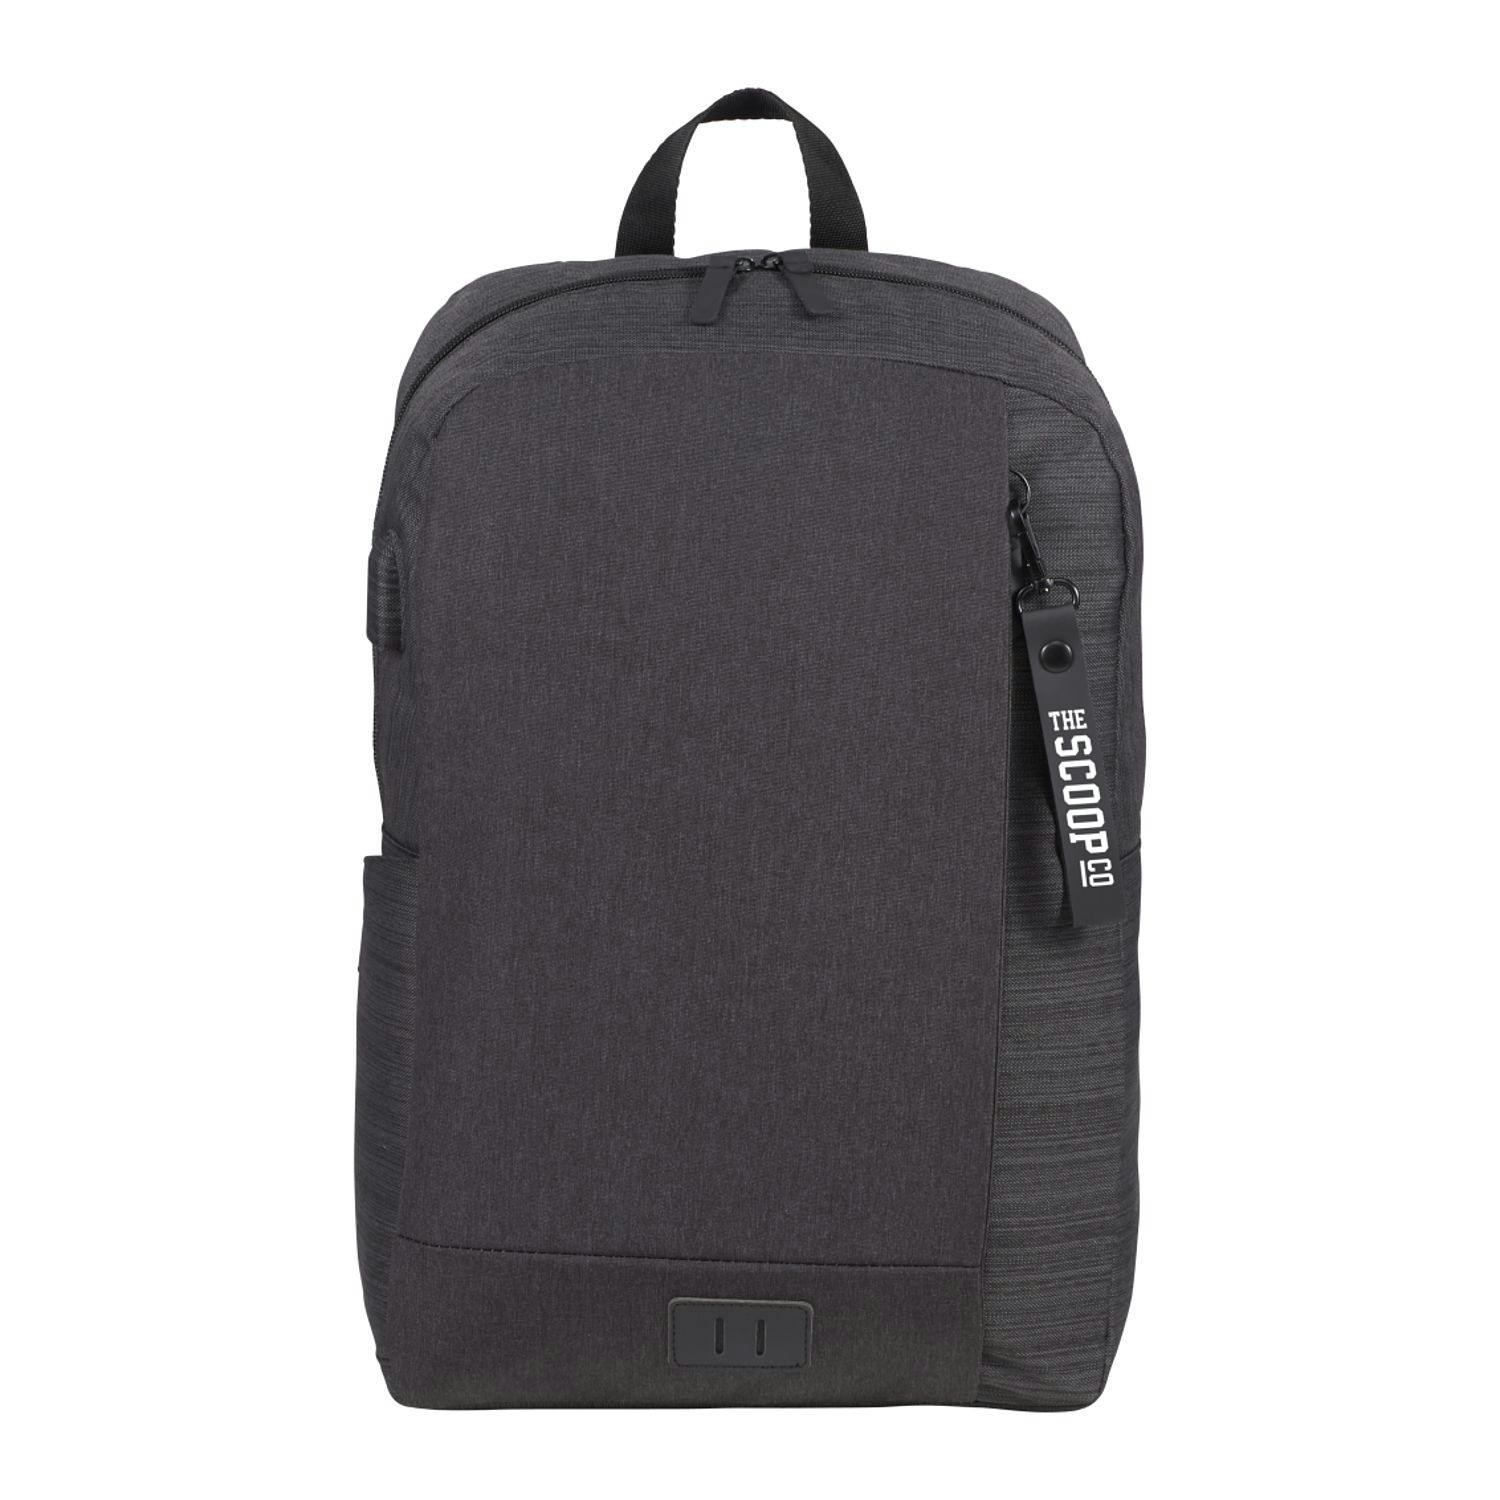 NBN Whitby Slim 15" Computer Backpack w/ USB Port - additional Image 1